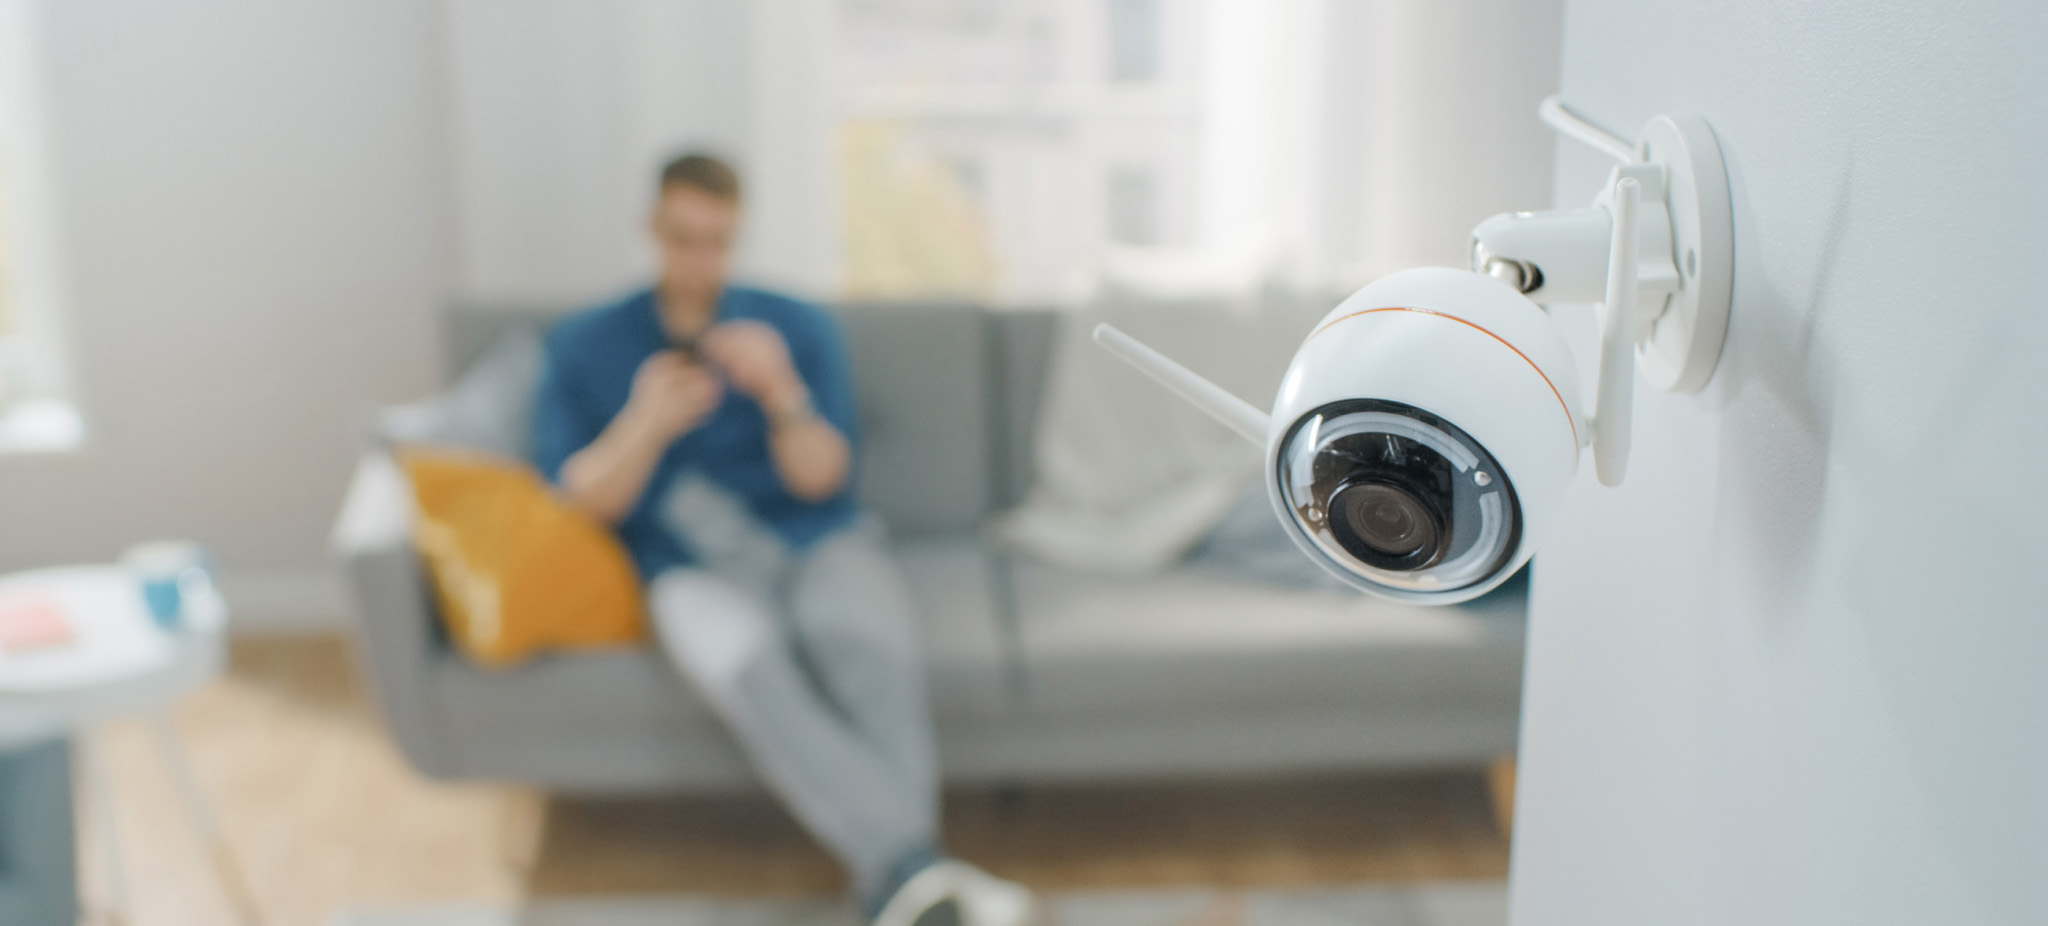 Indoor security camera mounted on wall in home